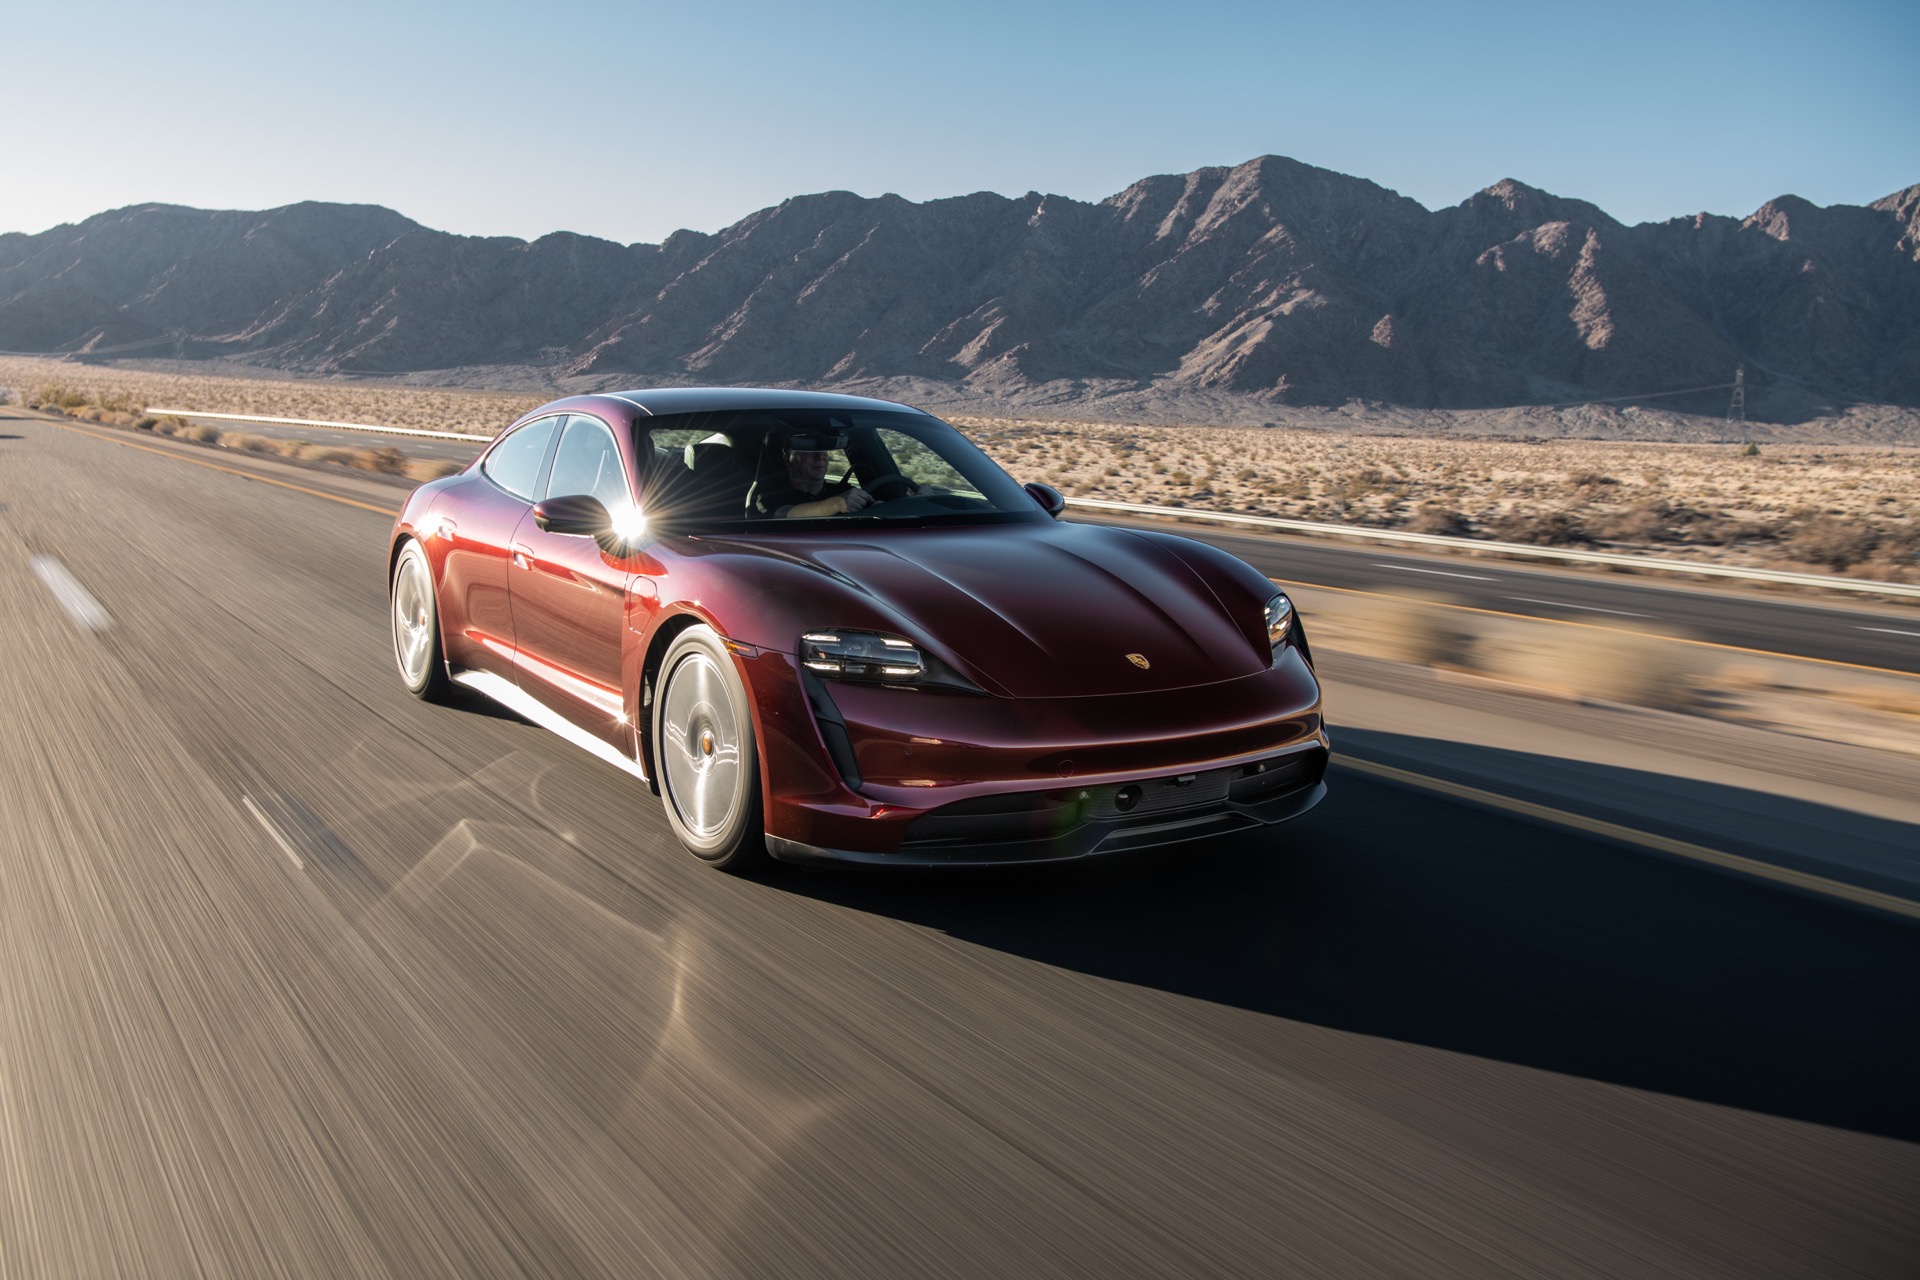 Porsche Taycan goes coast-to-coast with just 2.5 hours of chargingPorsche Taycan goes coast-to-coast with just 2.5 hours of charging